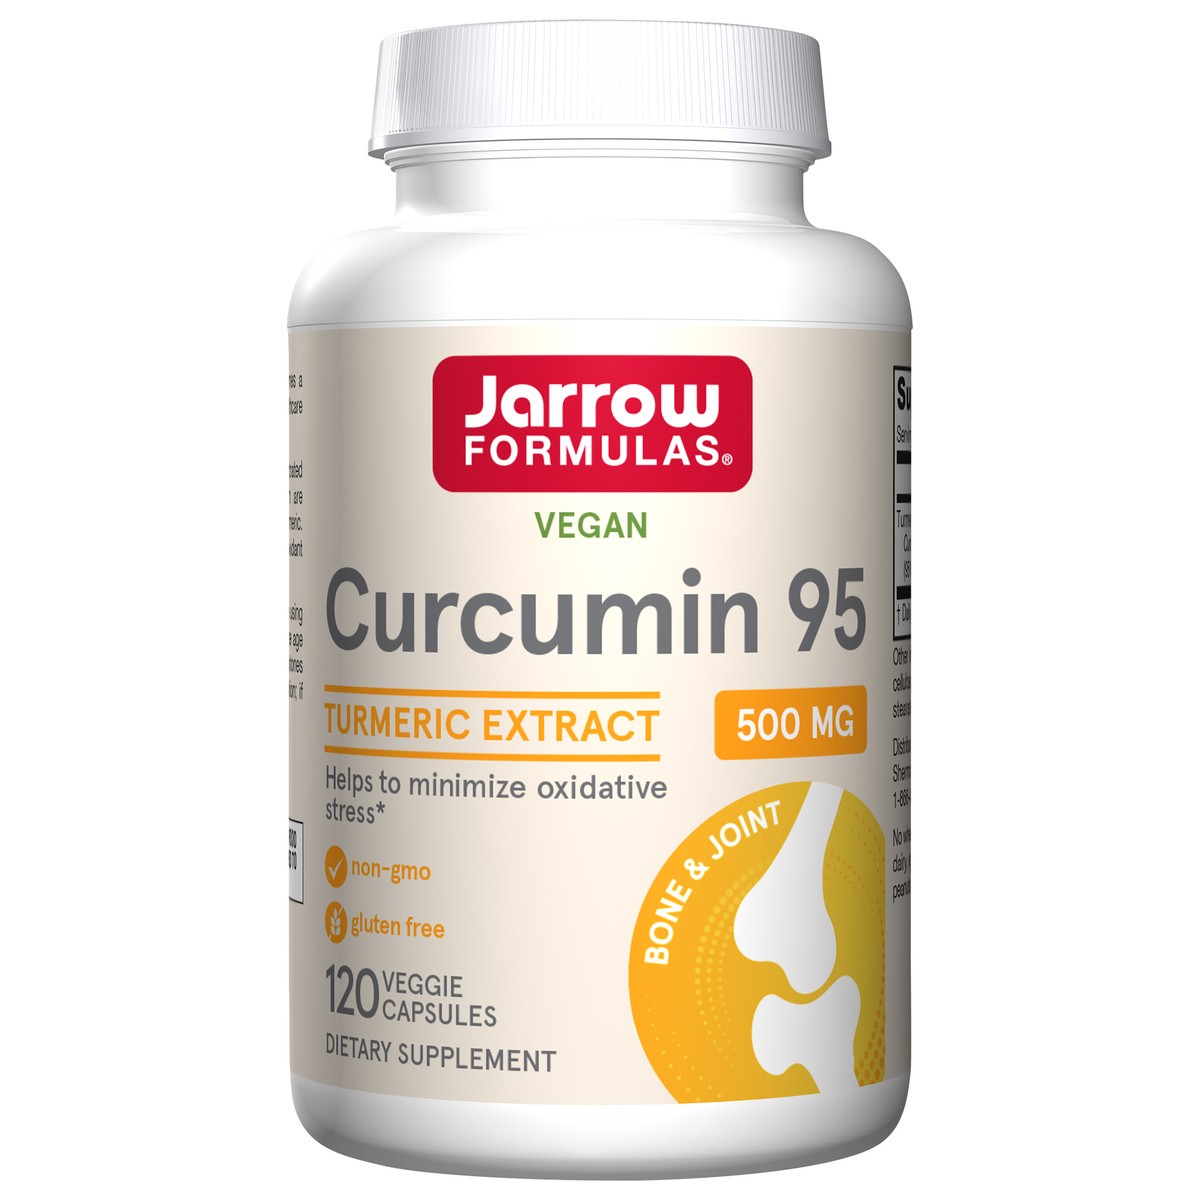 slide 1 of 4, Jarrow Formulas Curcumin 95 500 mg - Up to 120 Servings (Veggie Caps) - Turmeric Extract to Provide Antioxidant Support - Bone & Joint Dietary Supplement - Minimize Oxidative Stress, 120 ct